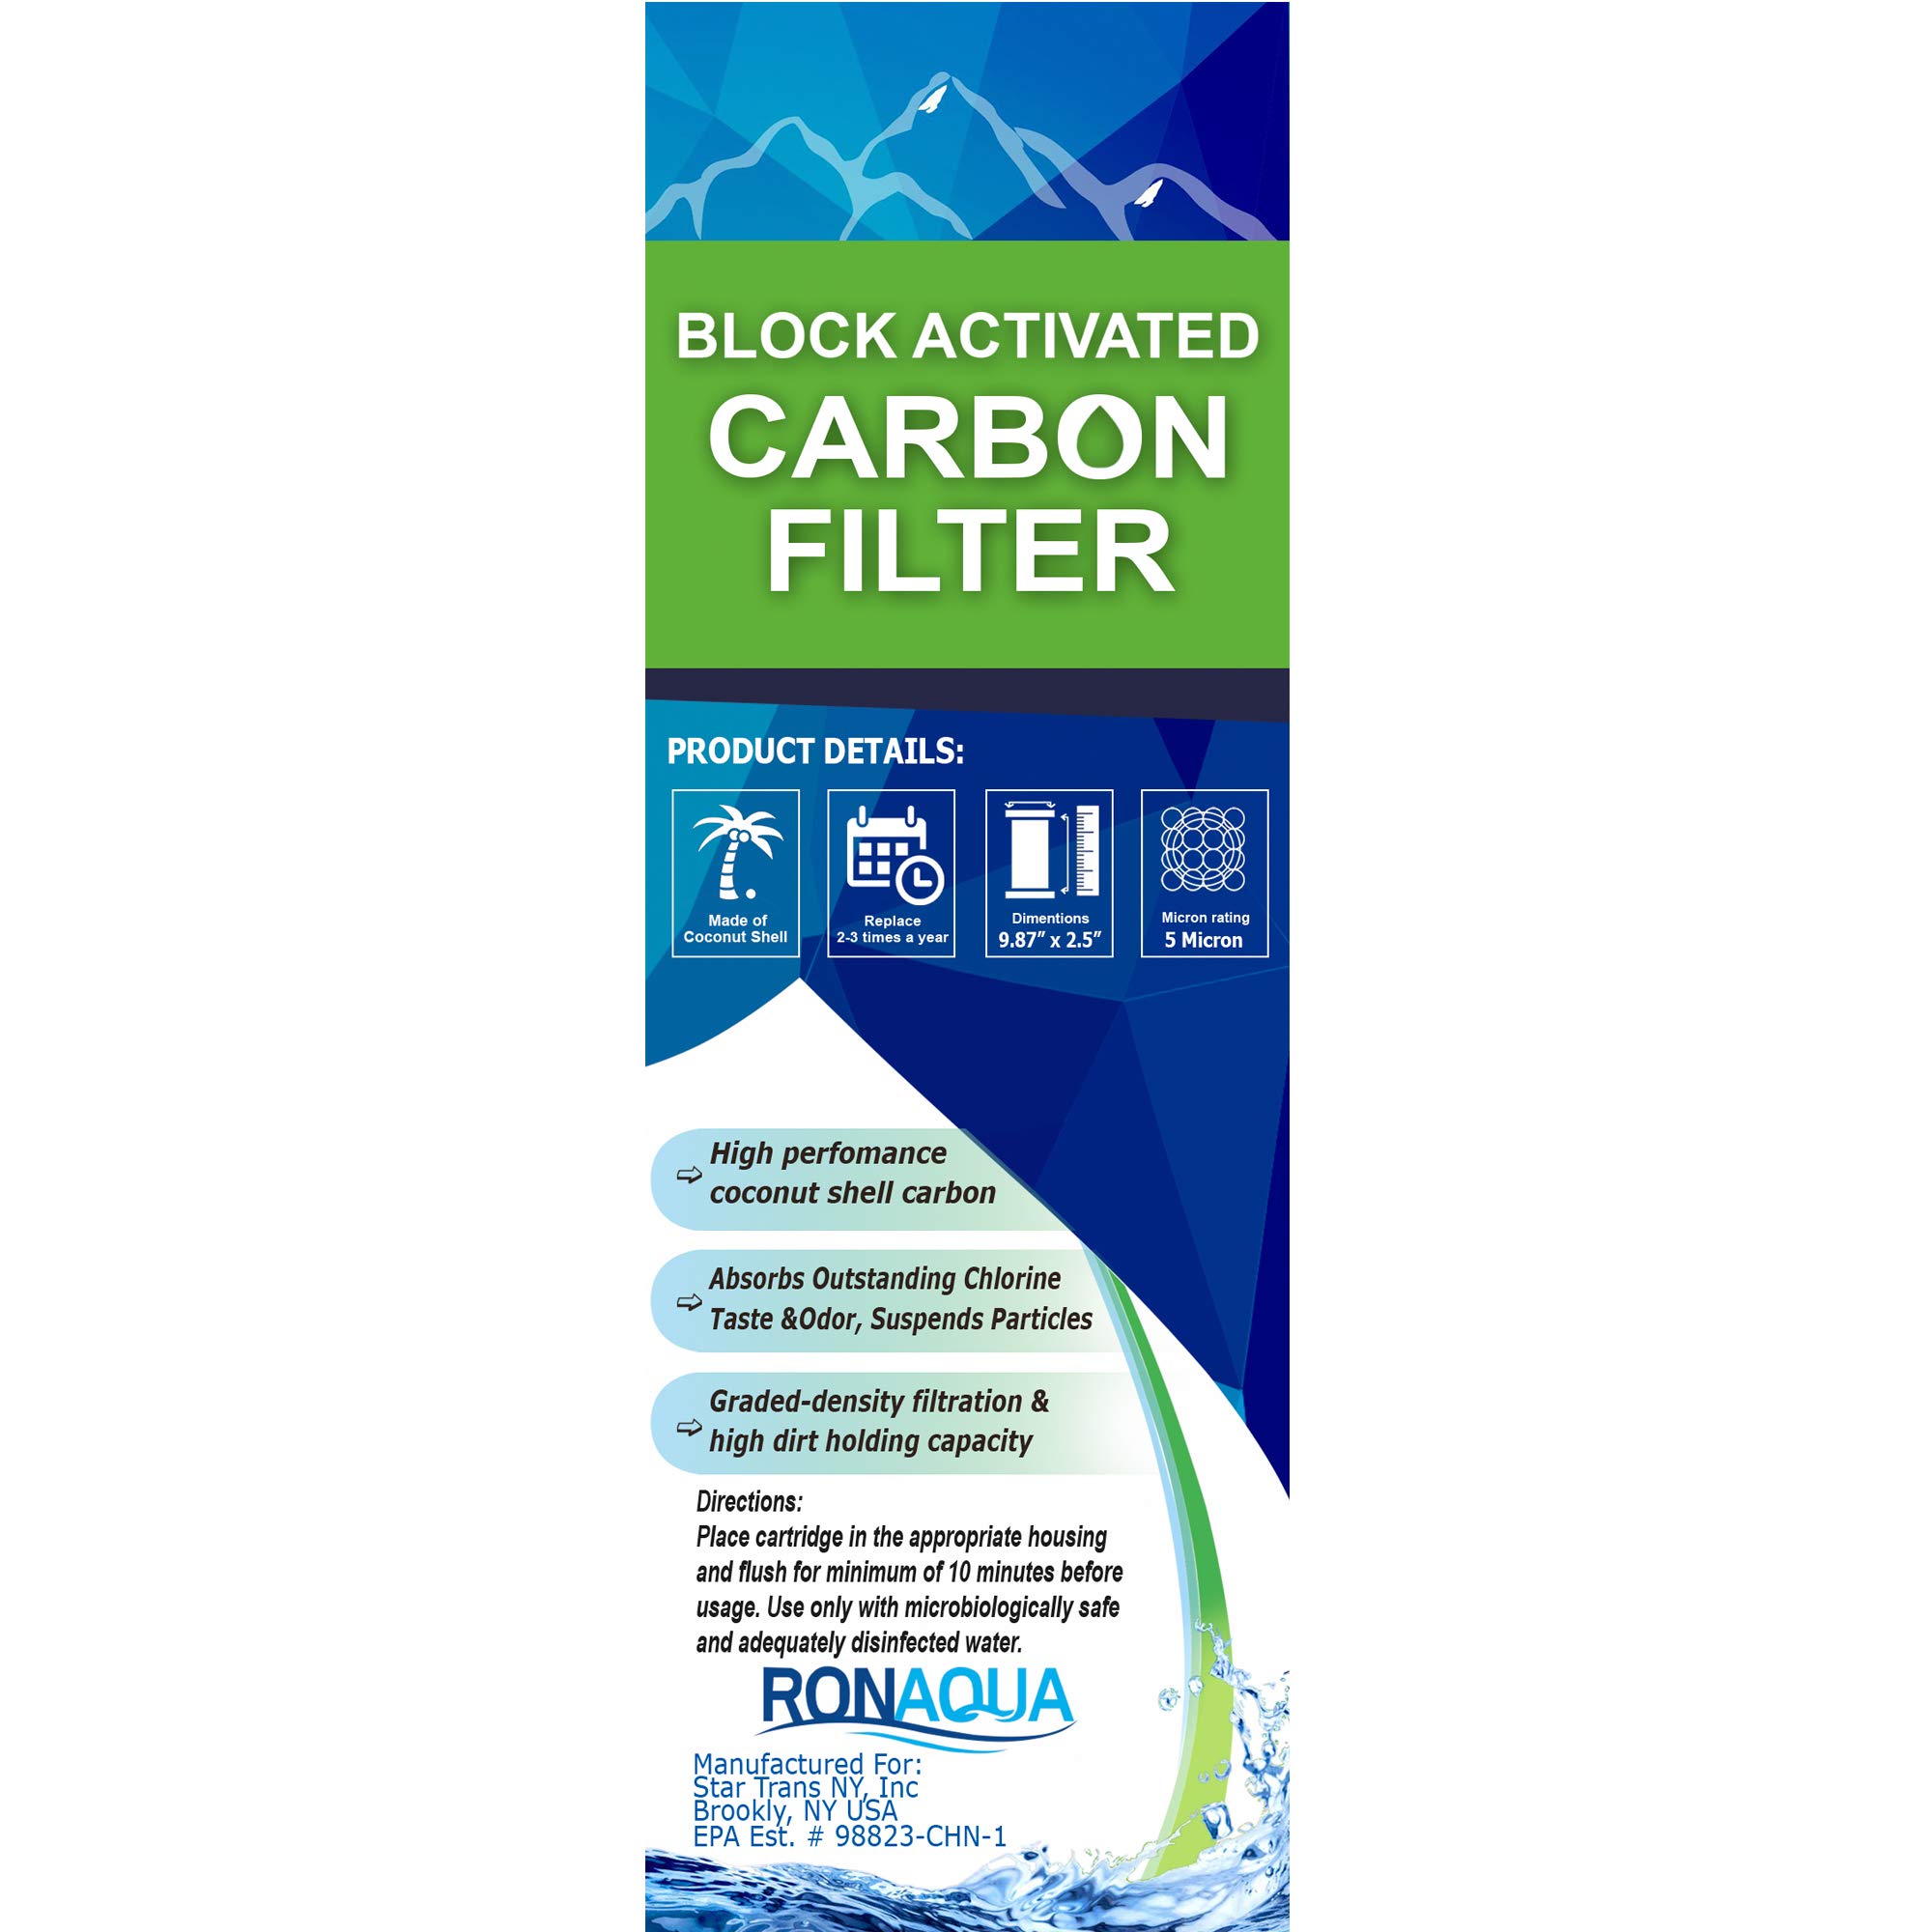 4 Block Activated Carbon 5 Micron Water Filters WELL-MATCHED with WFPFC8002, WFPFC9001, WHCF-WHWC, WHEF-WHWC, FXWTC, SCWH-5